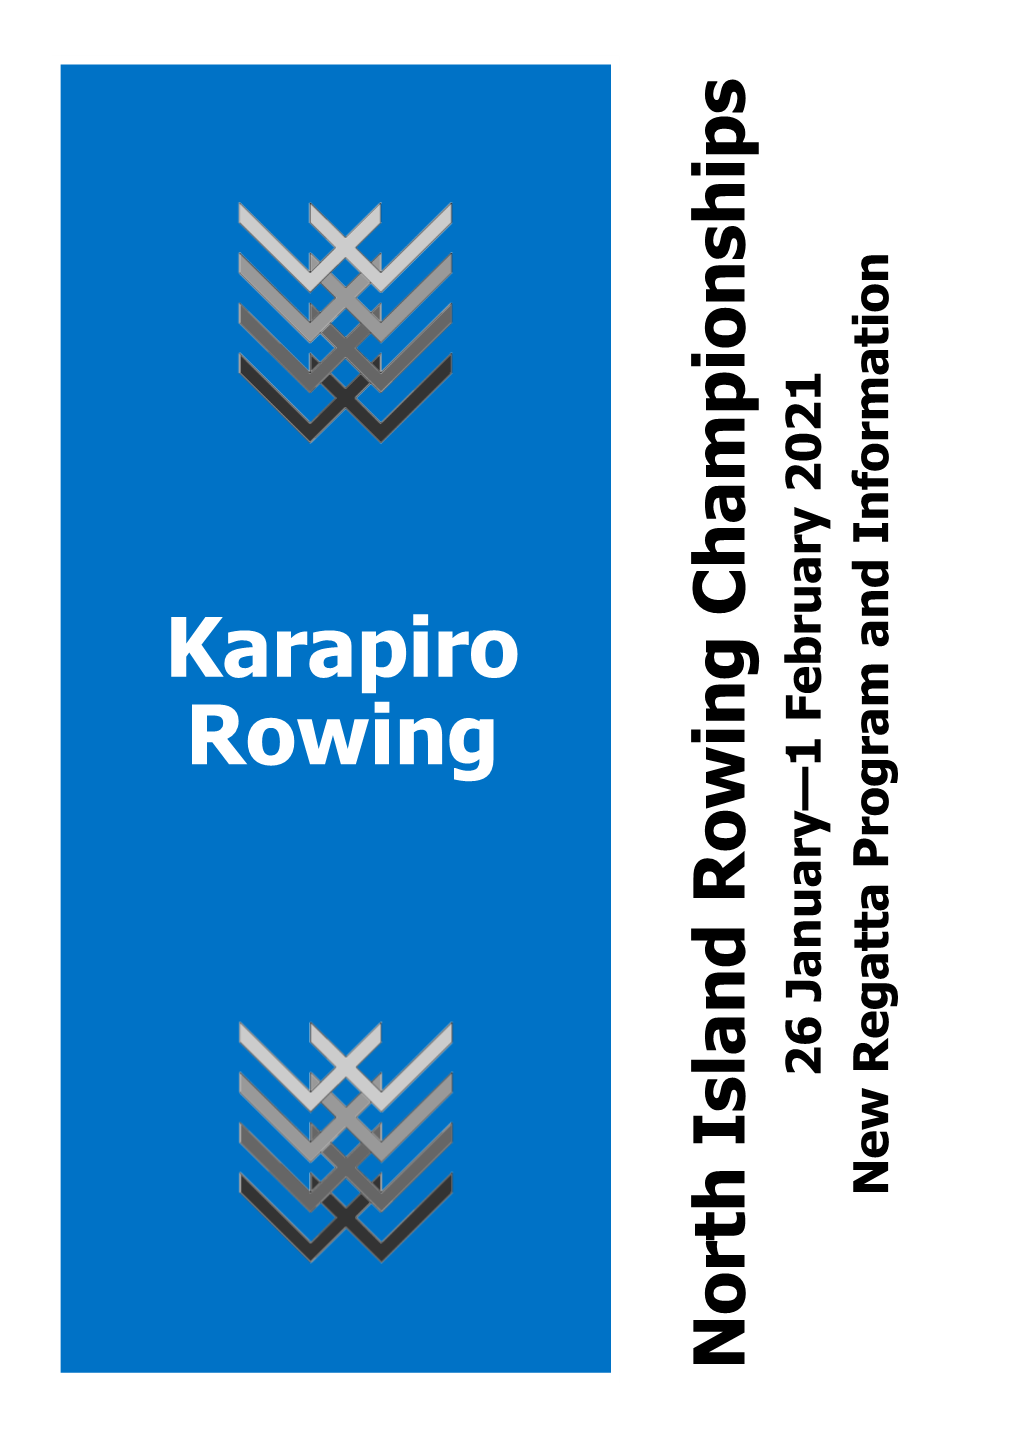 Karapiro Rowing Strongly Refutes Any Allegation It Was Biased